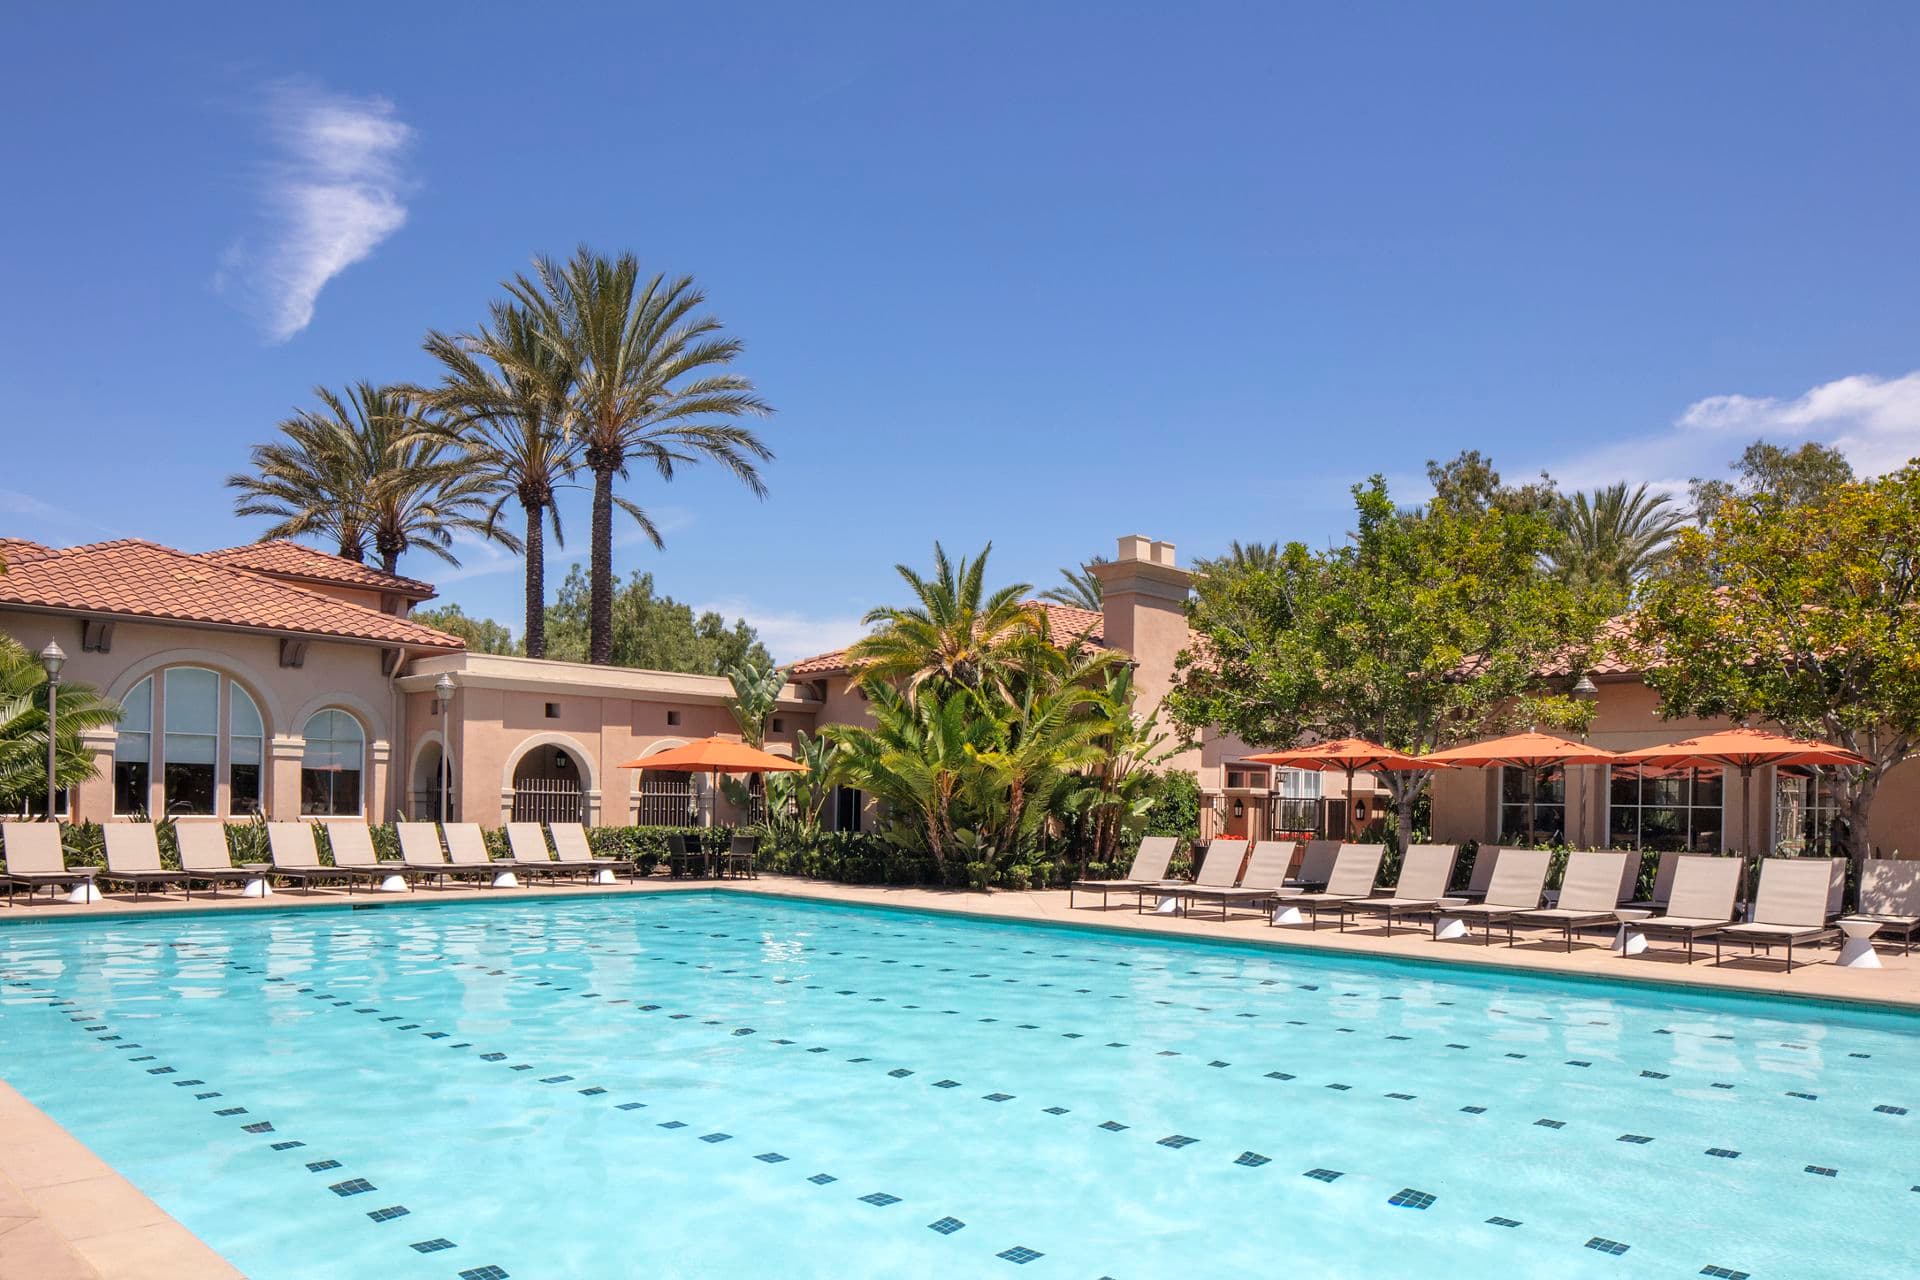 Pool view at Somerset Apartment Homes in Irvine, CA.